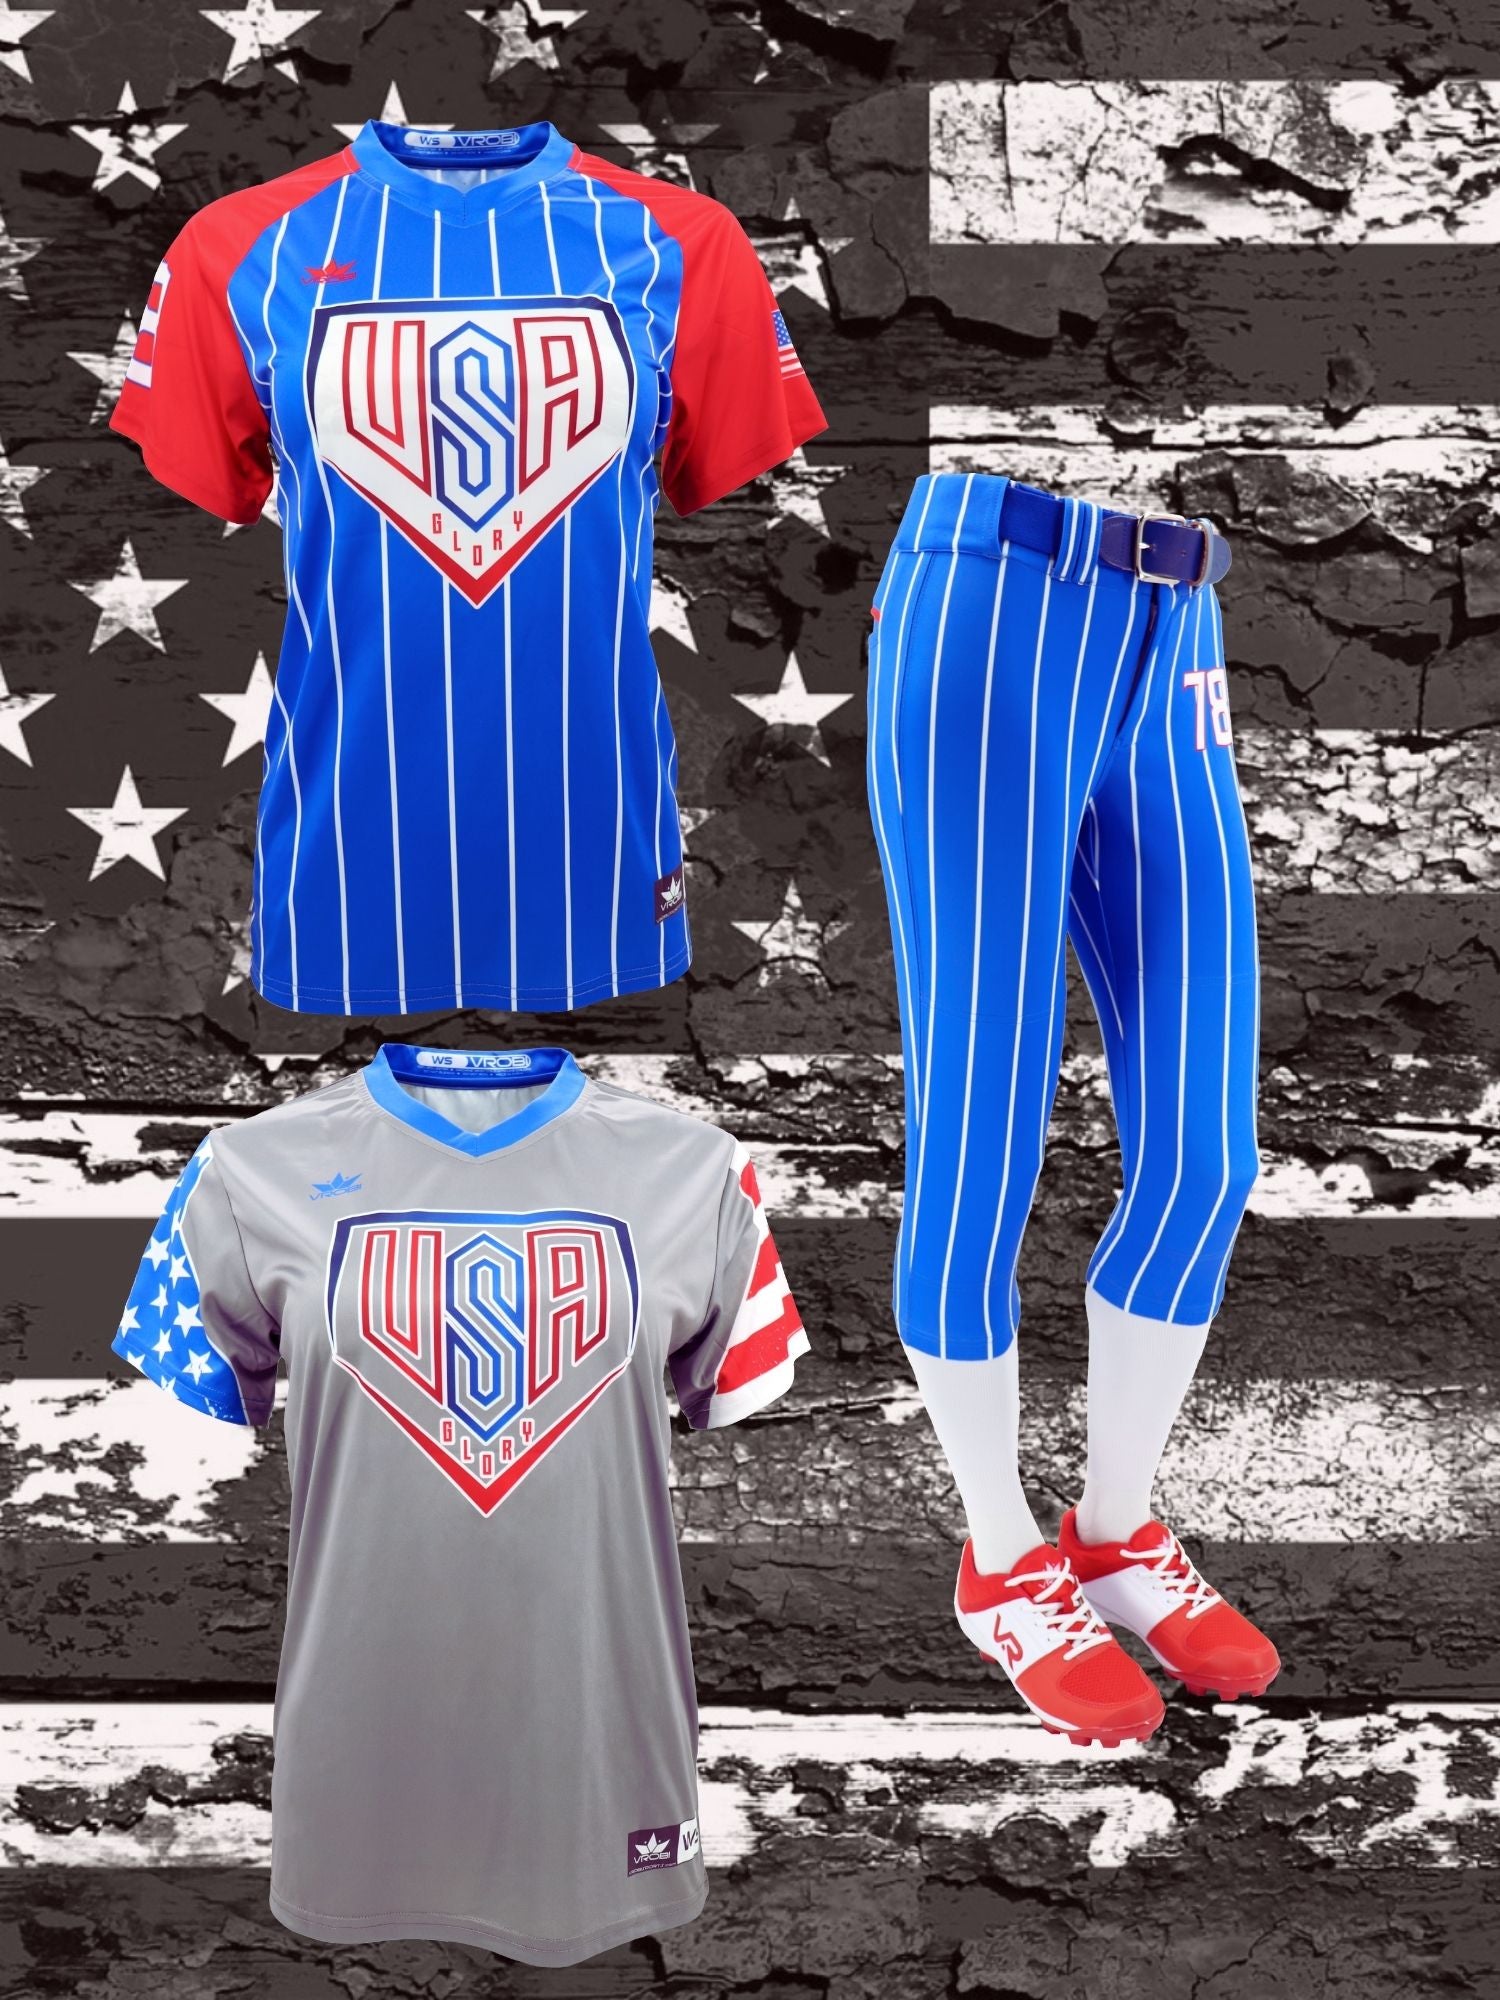 Bronze Team Package for Softball Teams showing Custom Full Due Uniforms and Bat Pack